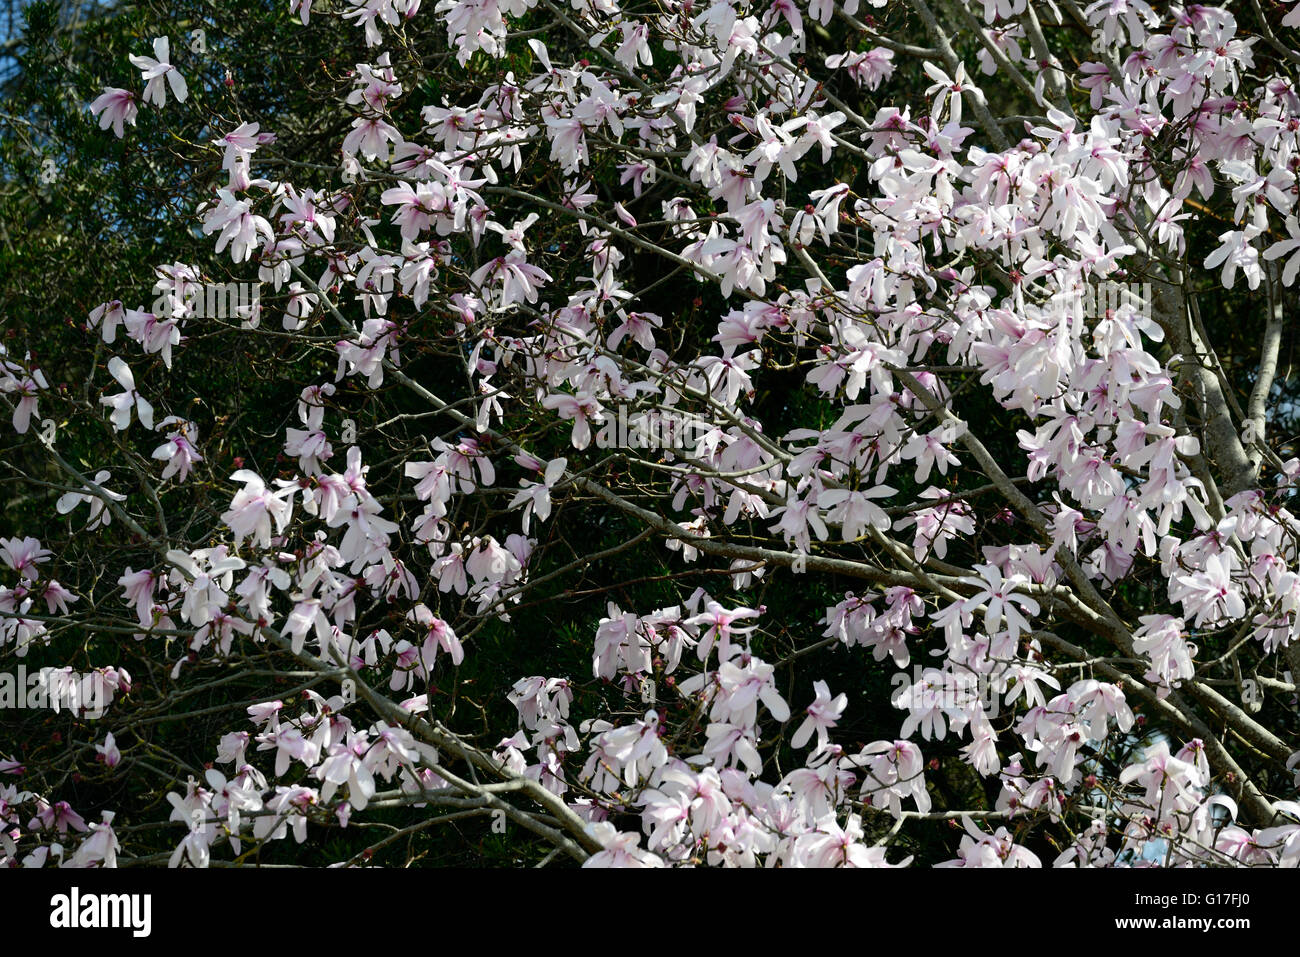 magnolia dawsoniana flower flowers blooms blossoms deciduous garden Magnolias pink scent scented tree trees spring RM Floral Stock Photo